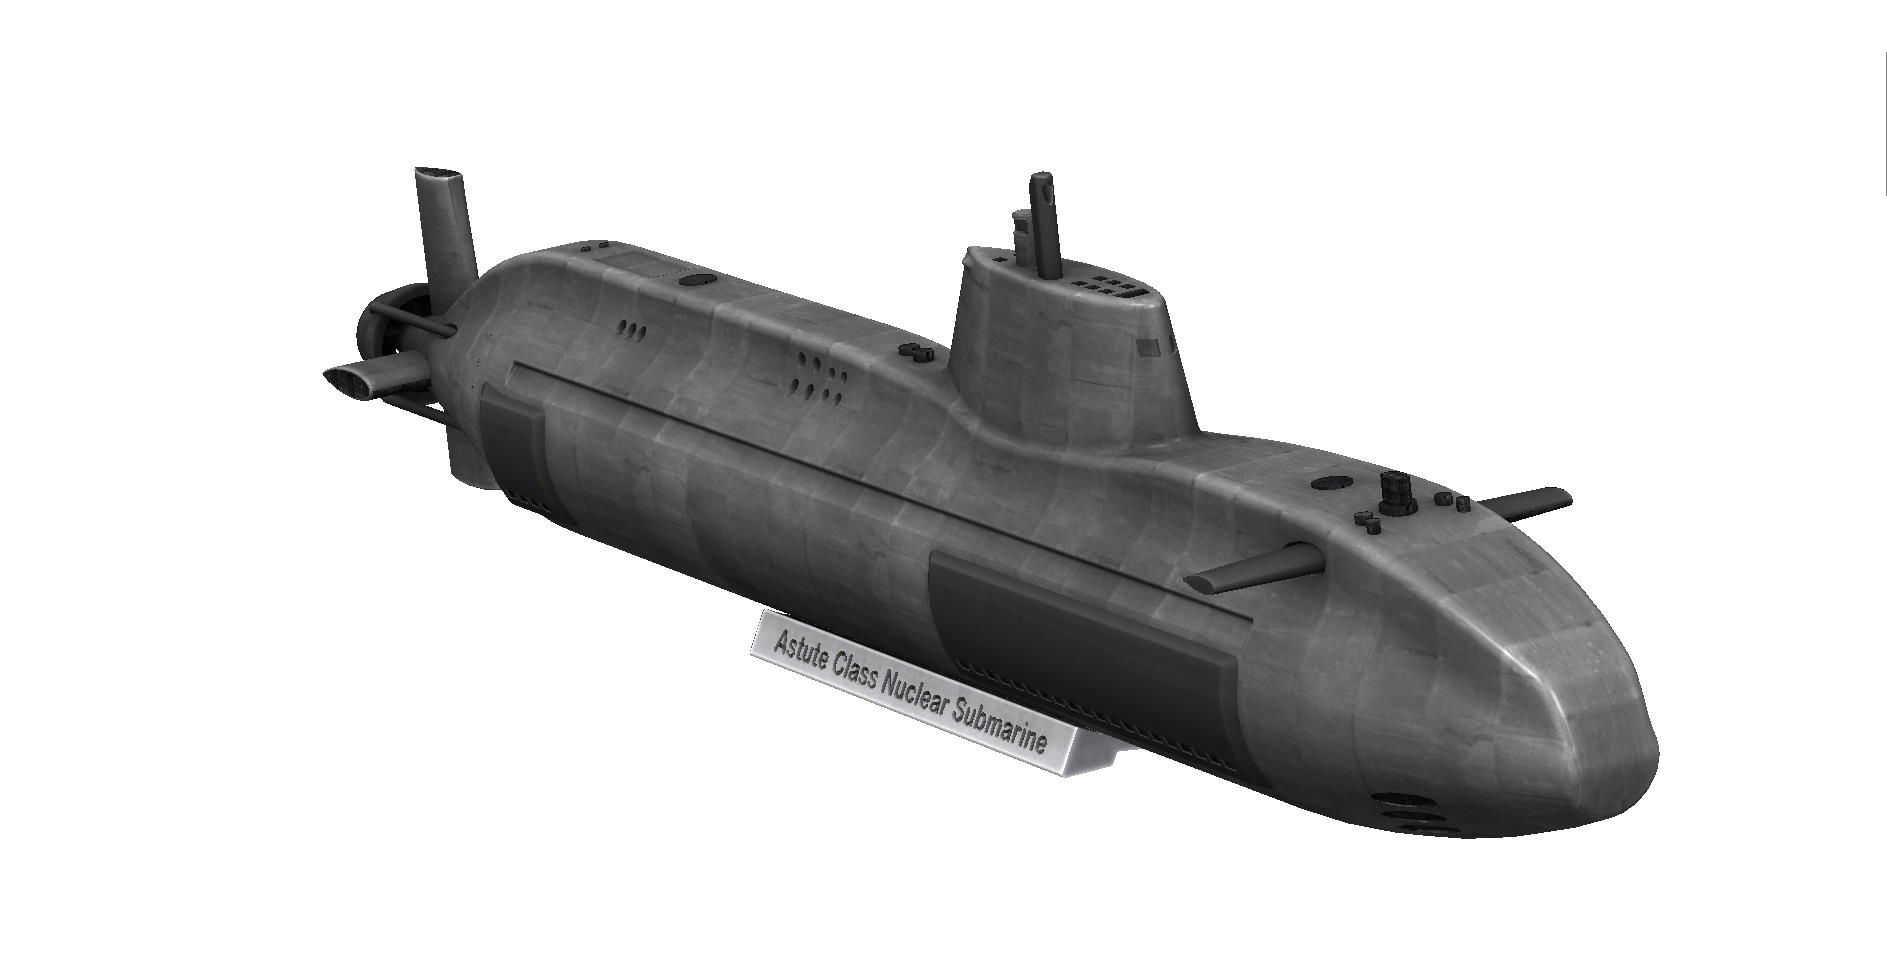 Astute Class Nuclear Submarine hull for R/C submariners